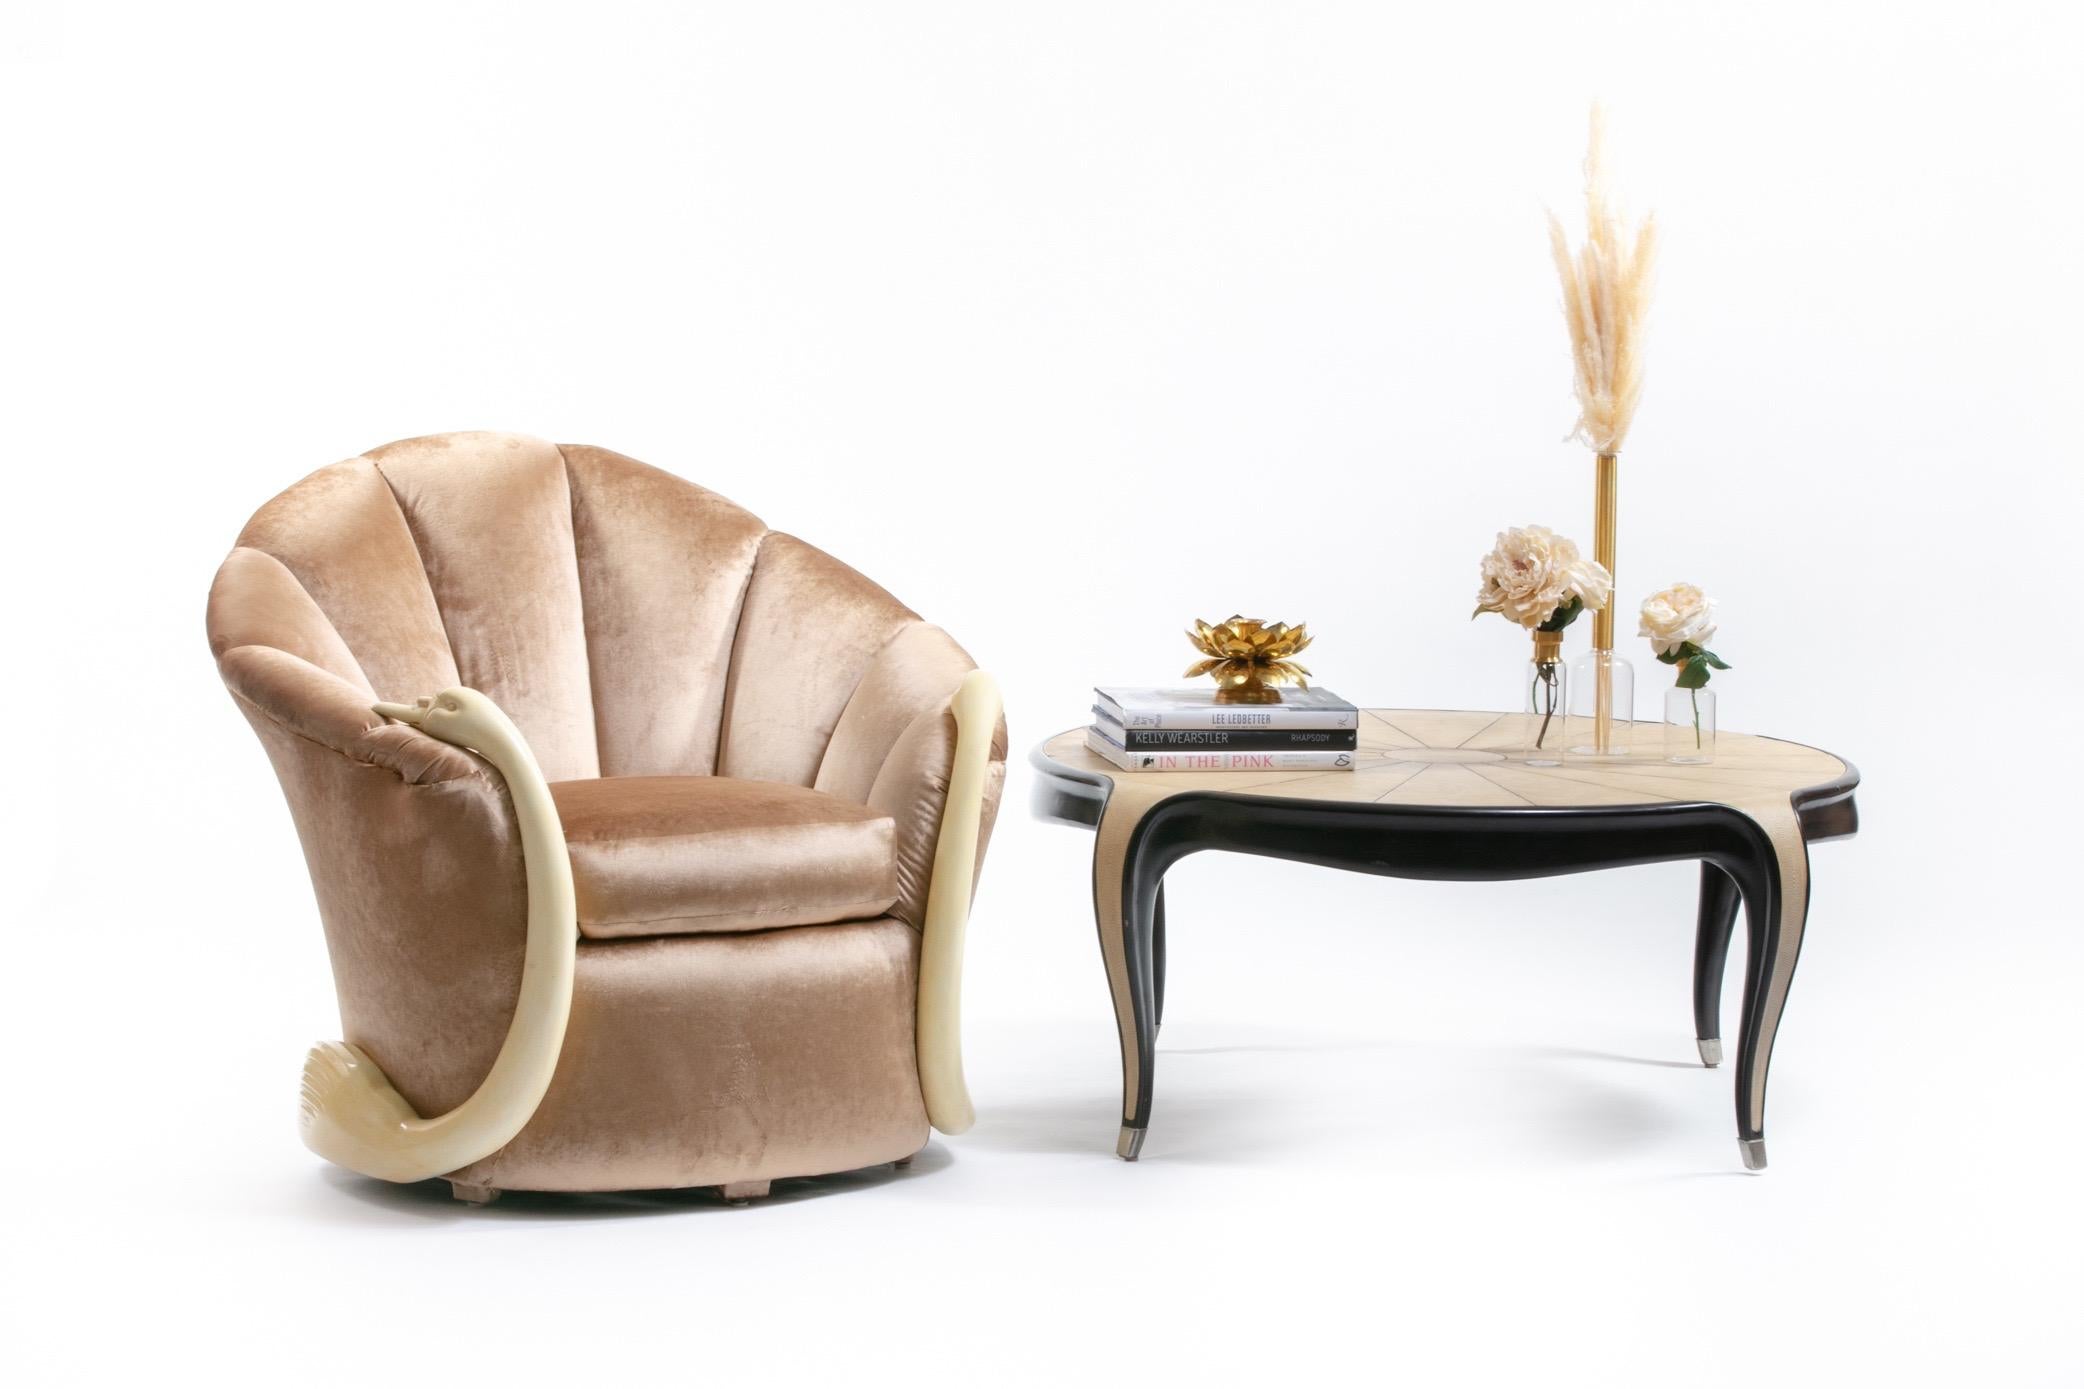 Lacquered Suzanne Geismar Swan Leda Lounge Chairs in Mink Velvet and Ivory Parchment Swans For Sale